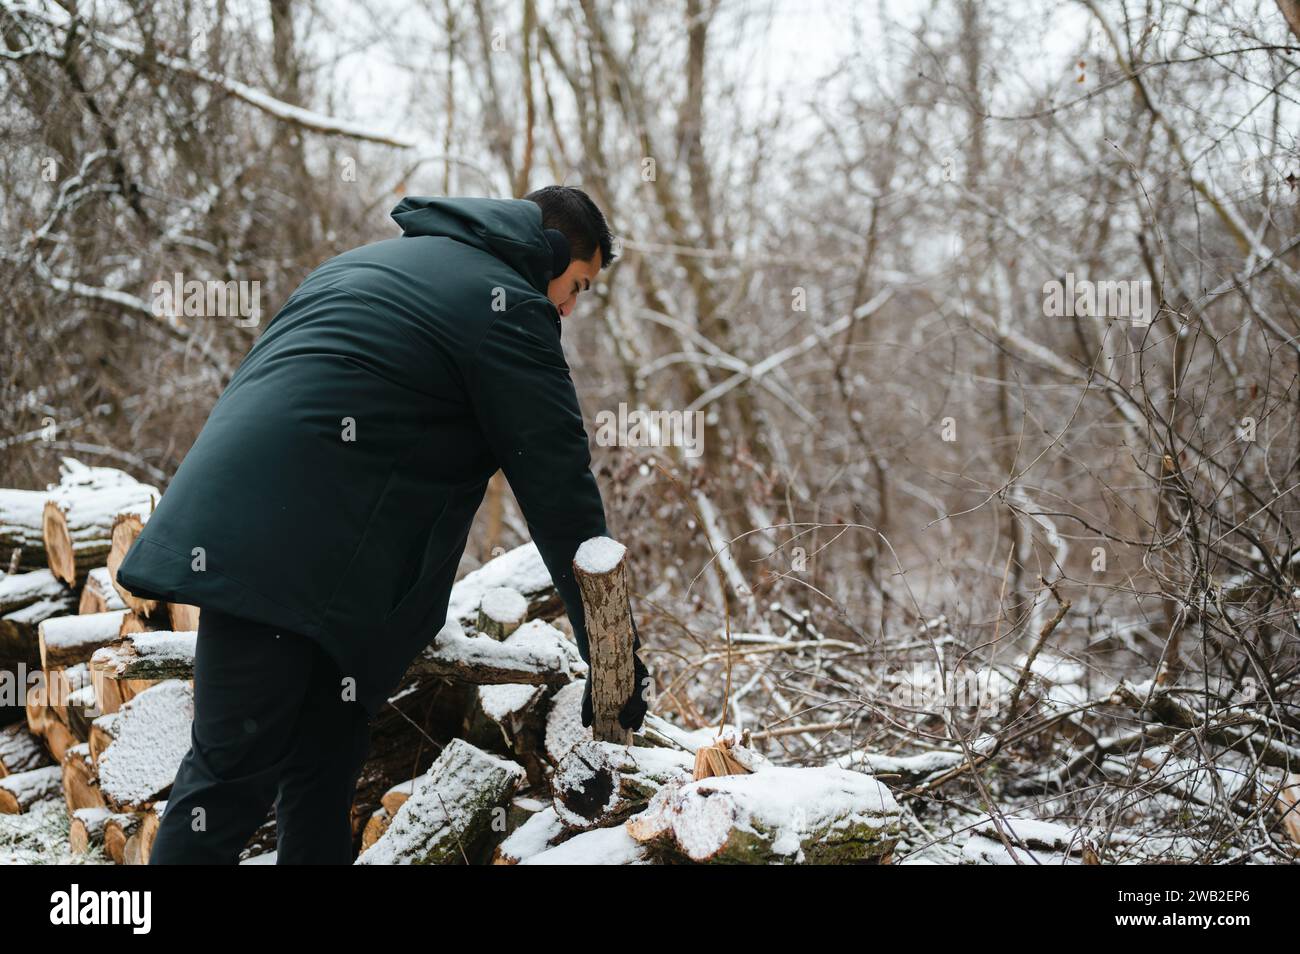 Man in winter attire collecting wood logs and stacking them in snow Stock Photo